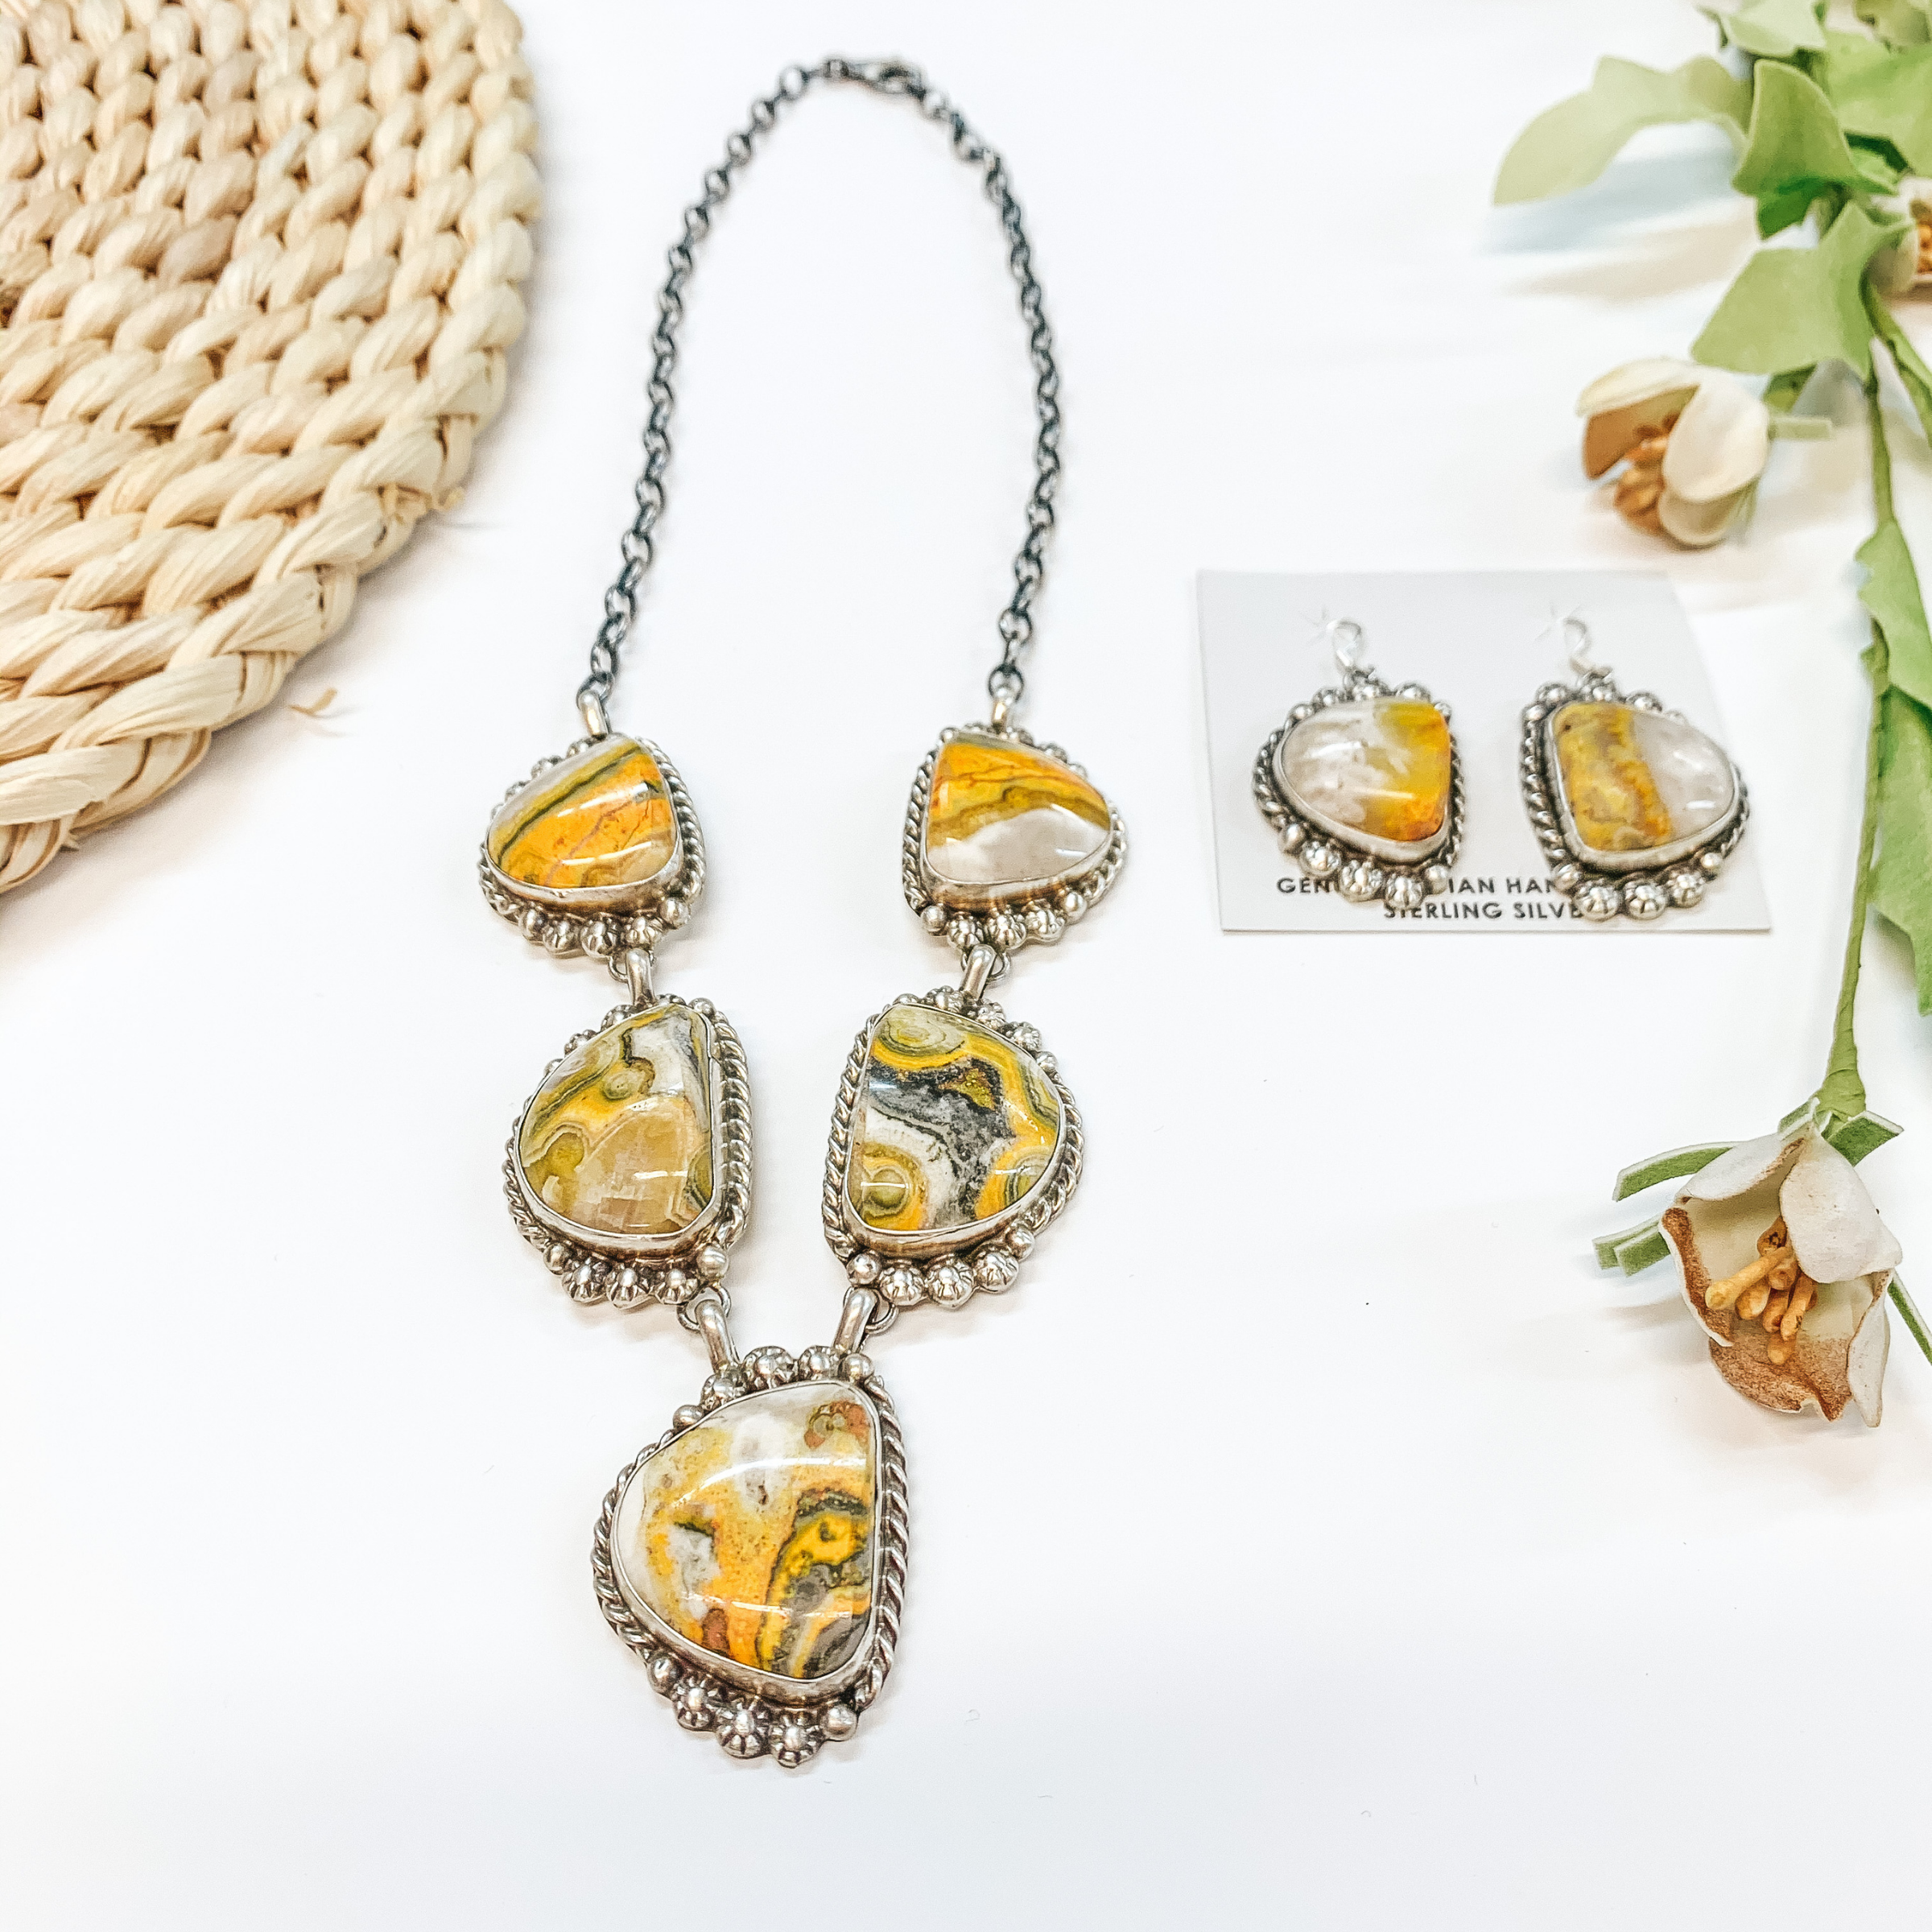 Betta Lee | Navajo Handmade Sterling Silver & Bumble Bee Jasper Necklace + Matching Earrings - Giddy Up Glamour Boutique